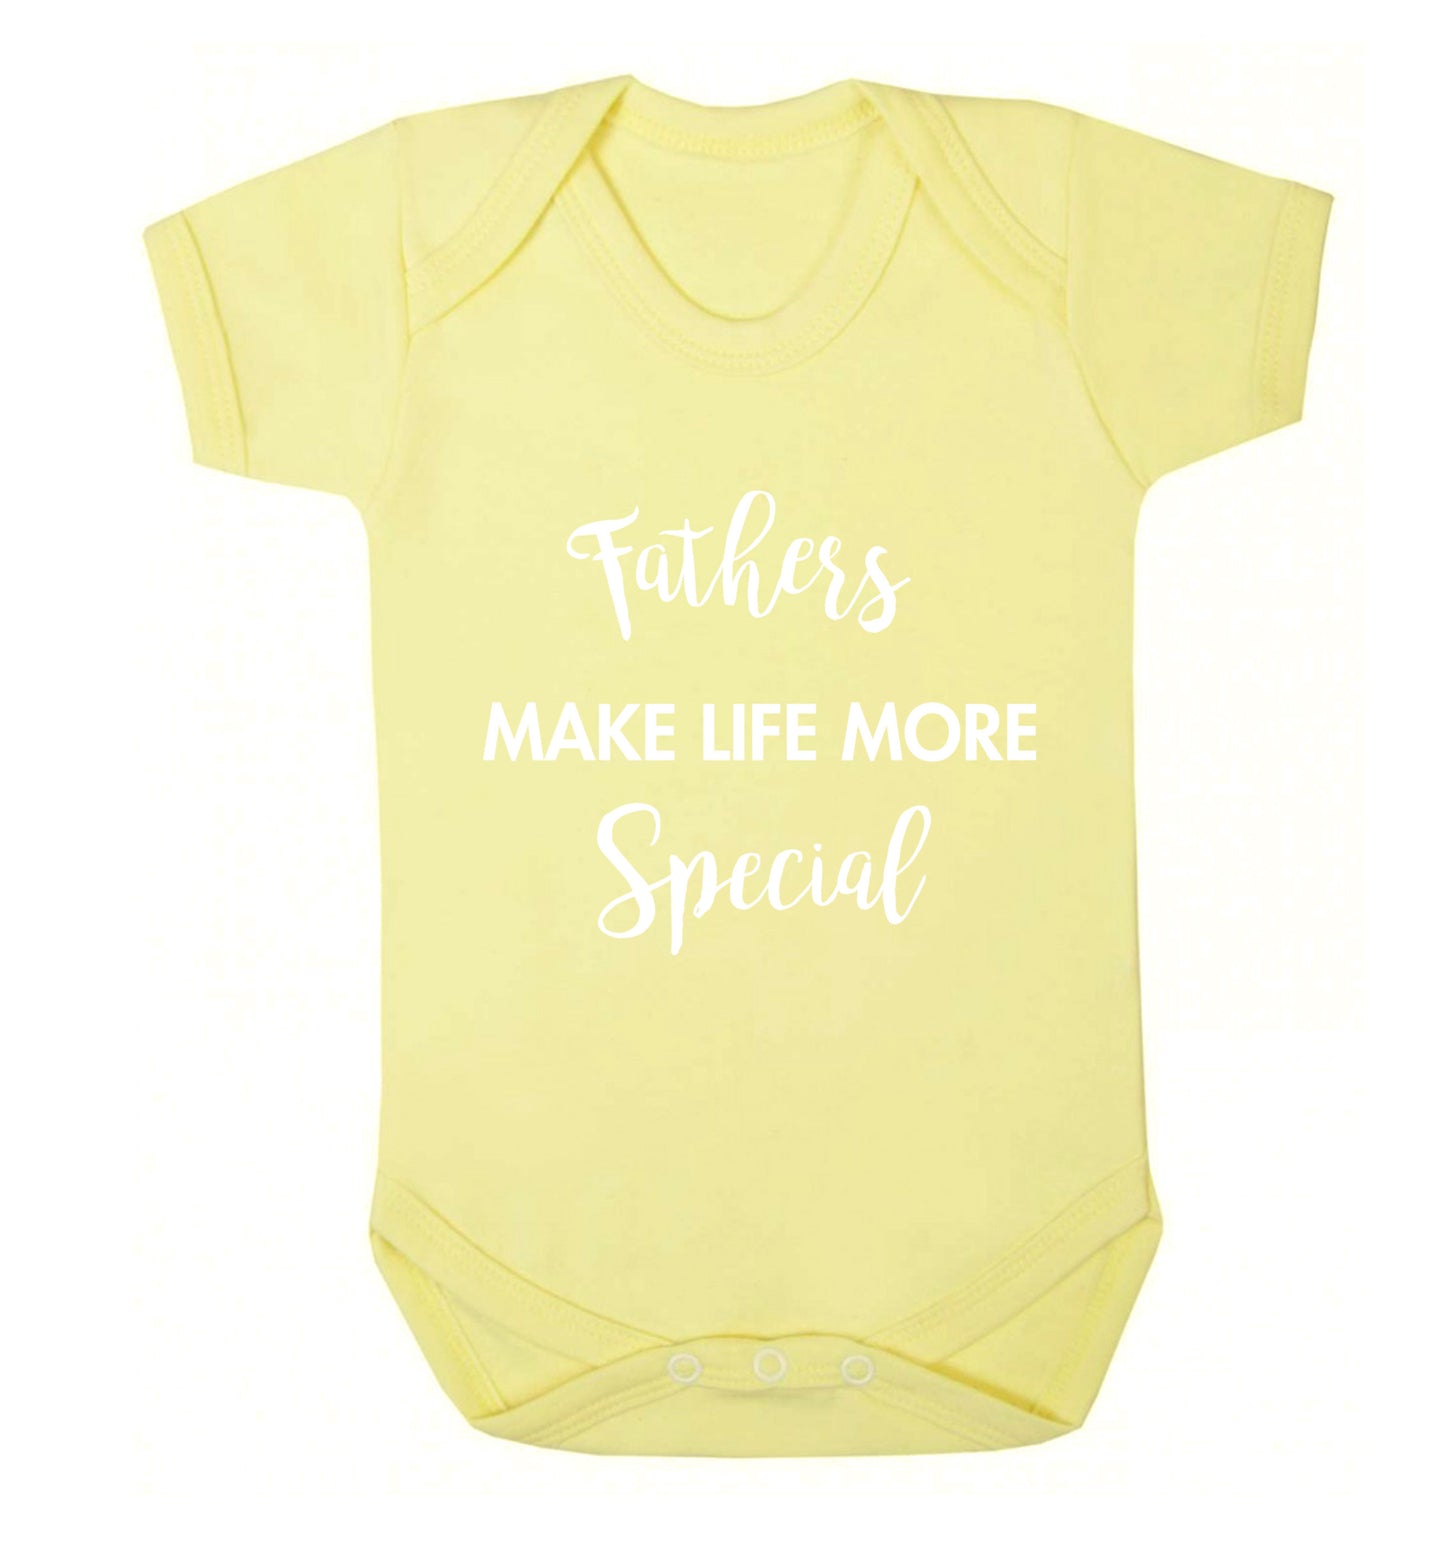 Fathers make life more special Baby Vest pale yellow 18-24 months